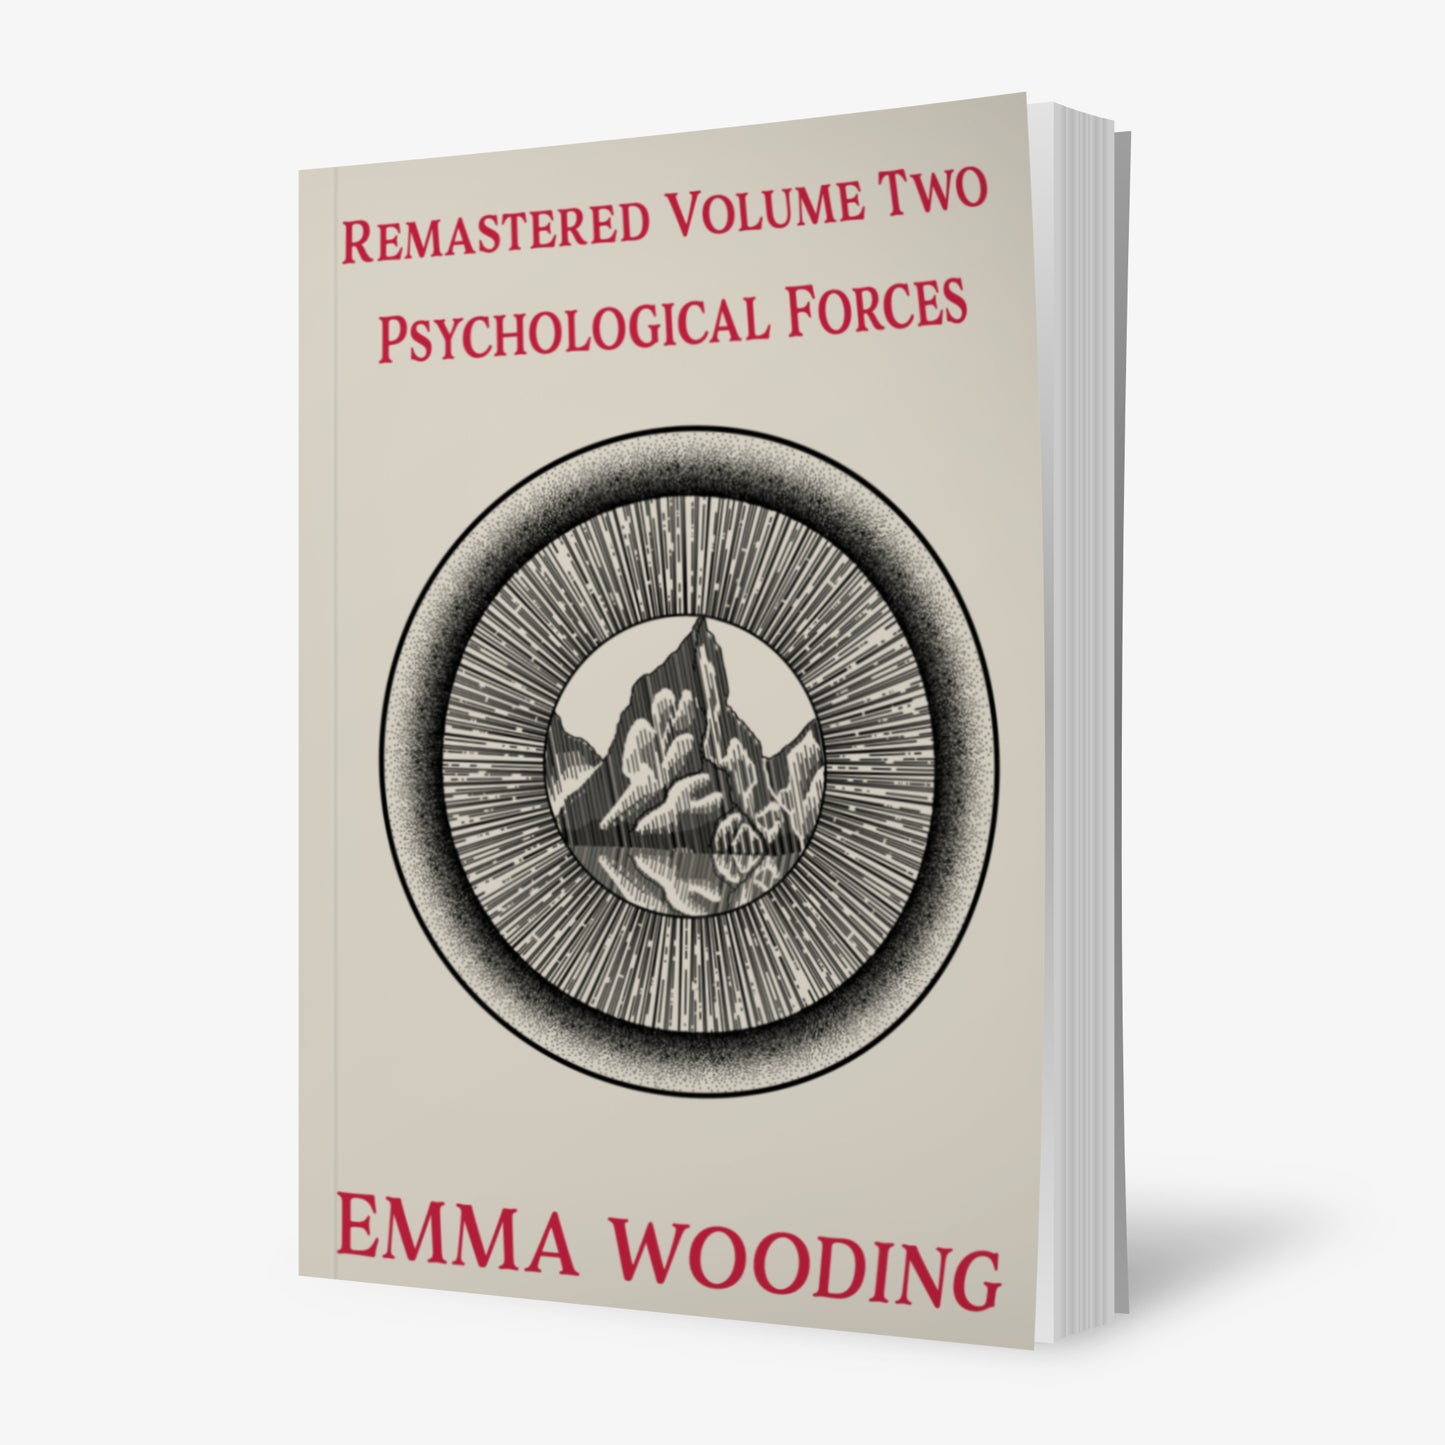 Remastered Volume Two: Psychological Forces by Emma Wooding